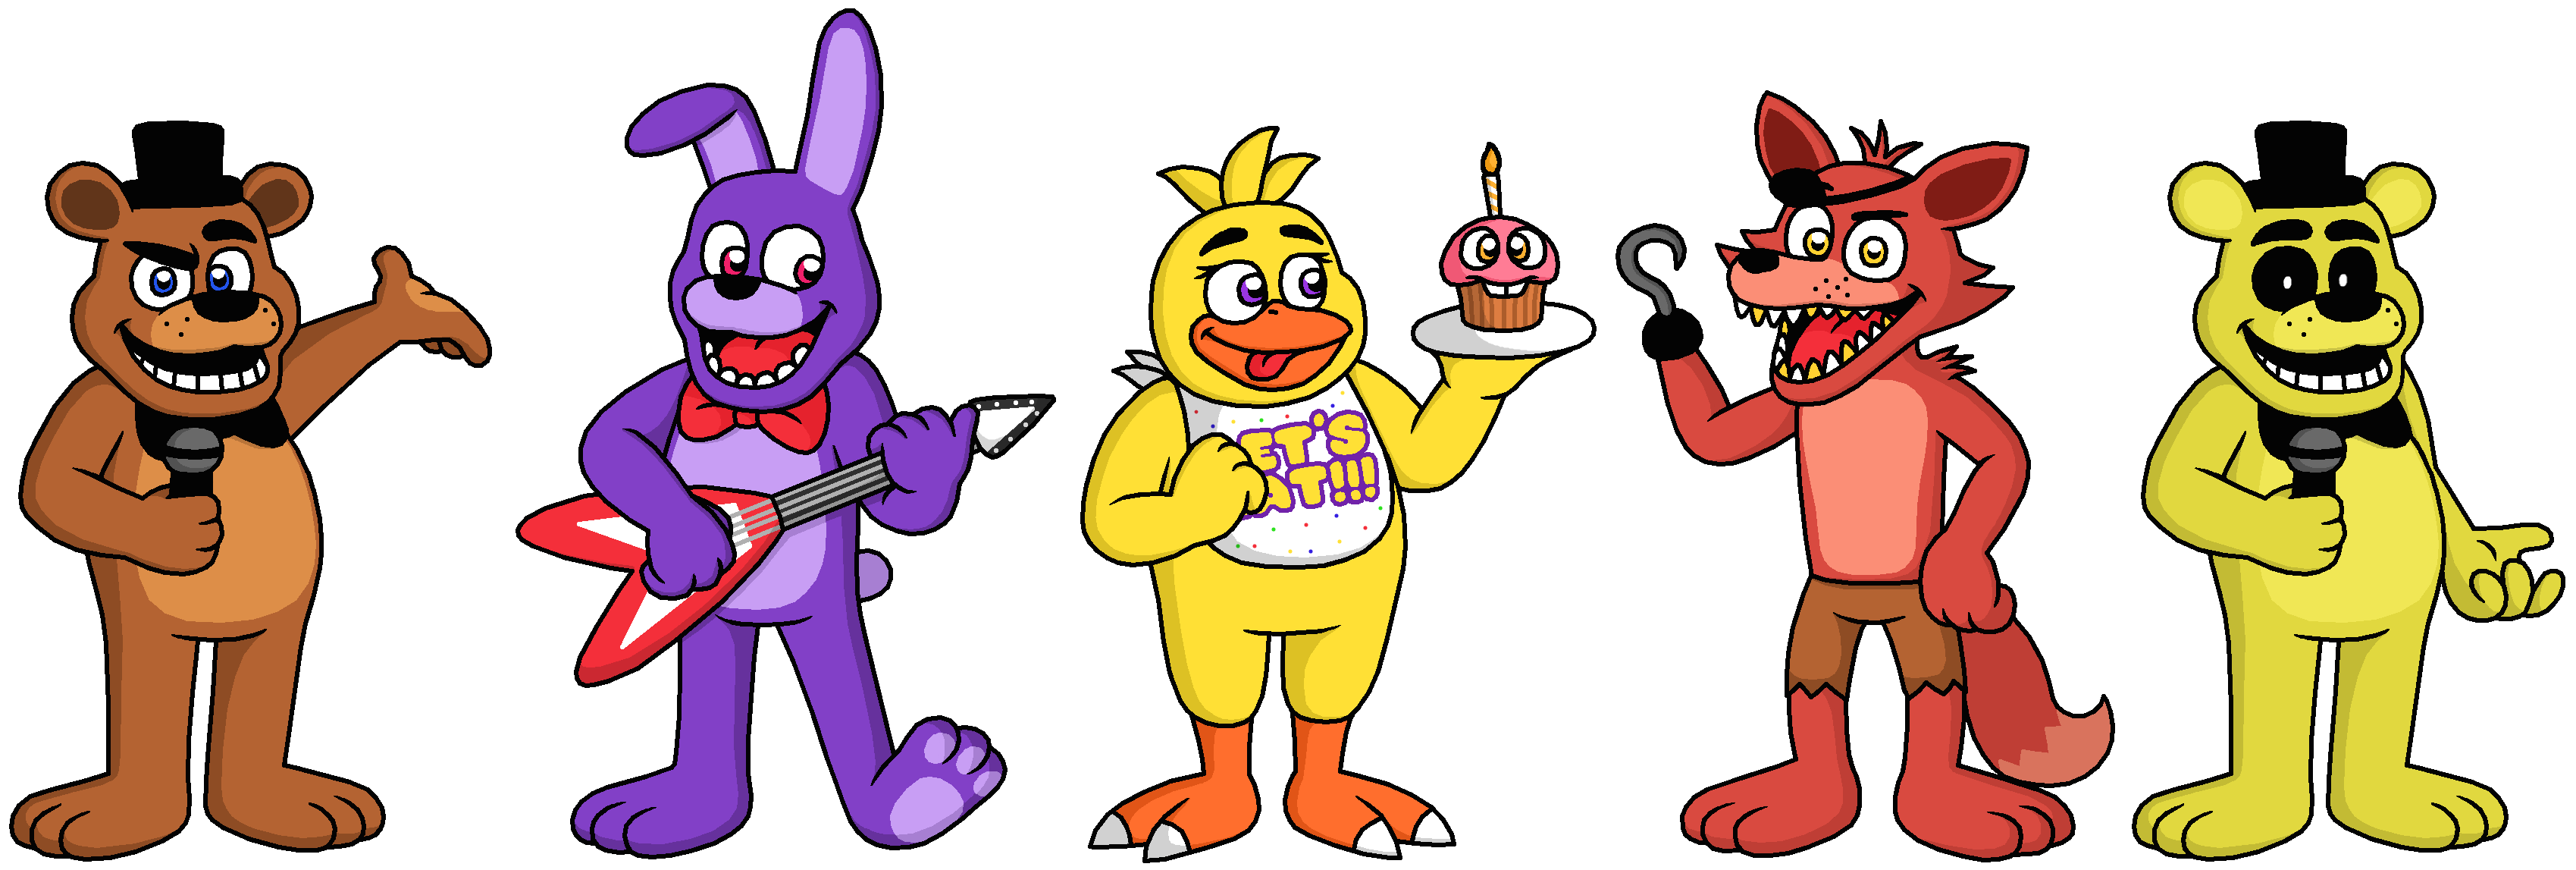 New and Shiny (Five Nights at Freddy's 2) by ArtyJoyful on DeviantArt